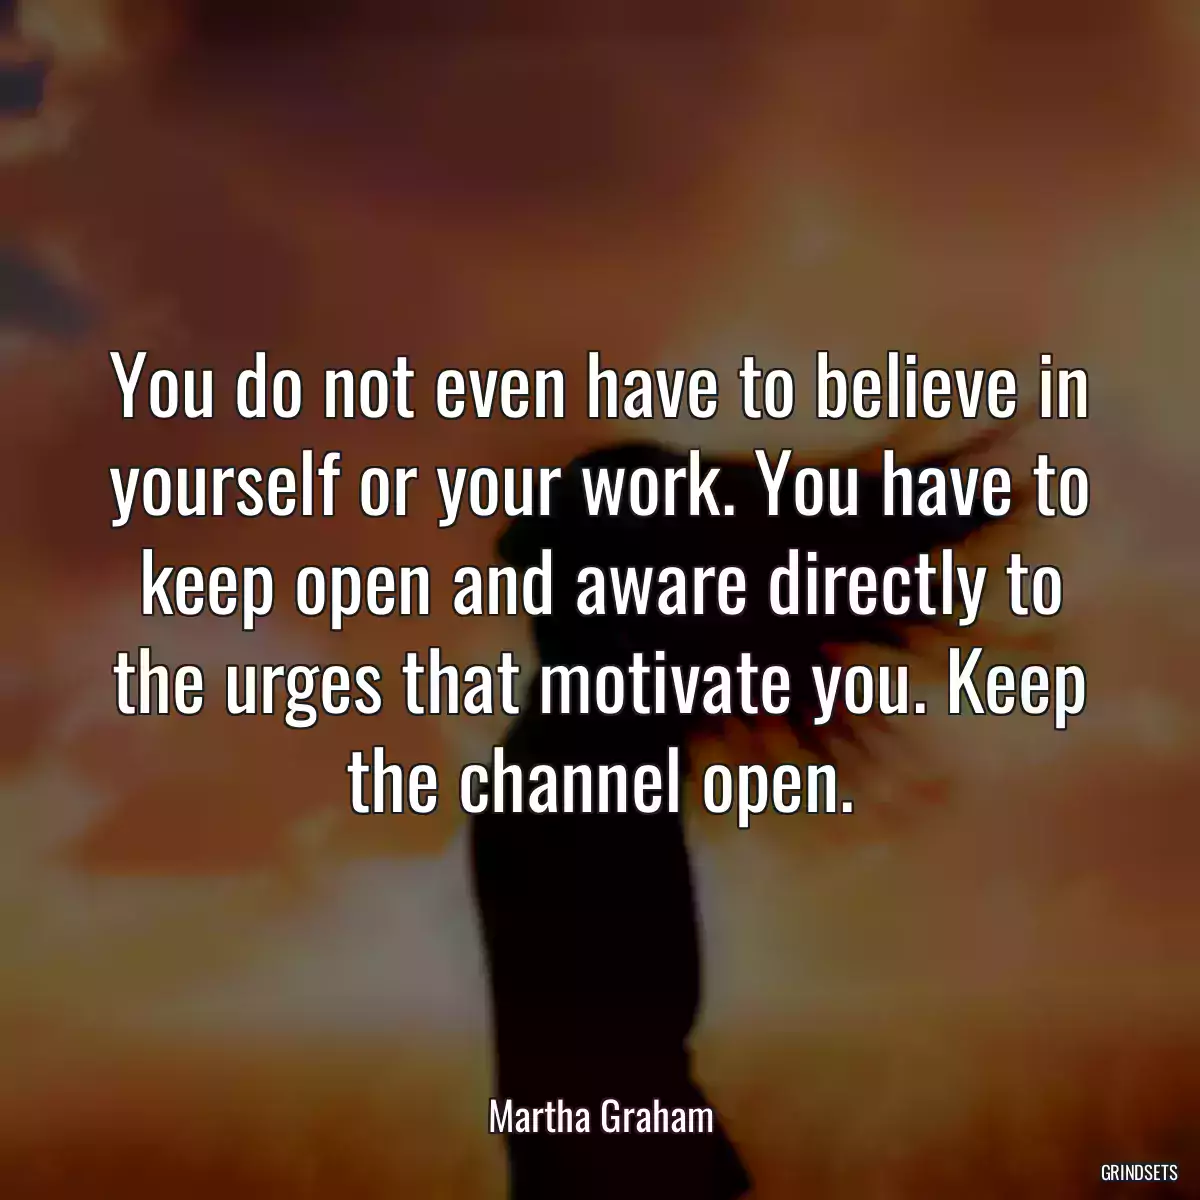 You do not even have to believe in yourself or your work. You have to keep open and aware directly to the urges that motivate you. Keep the channel open.